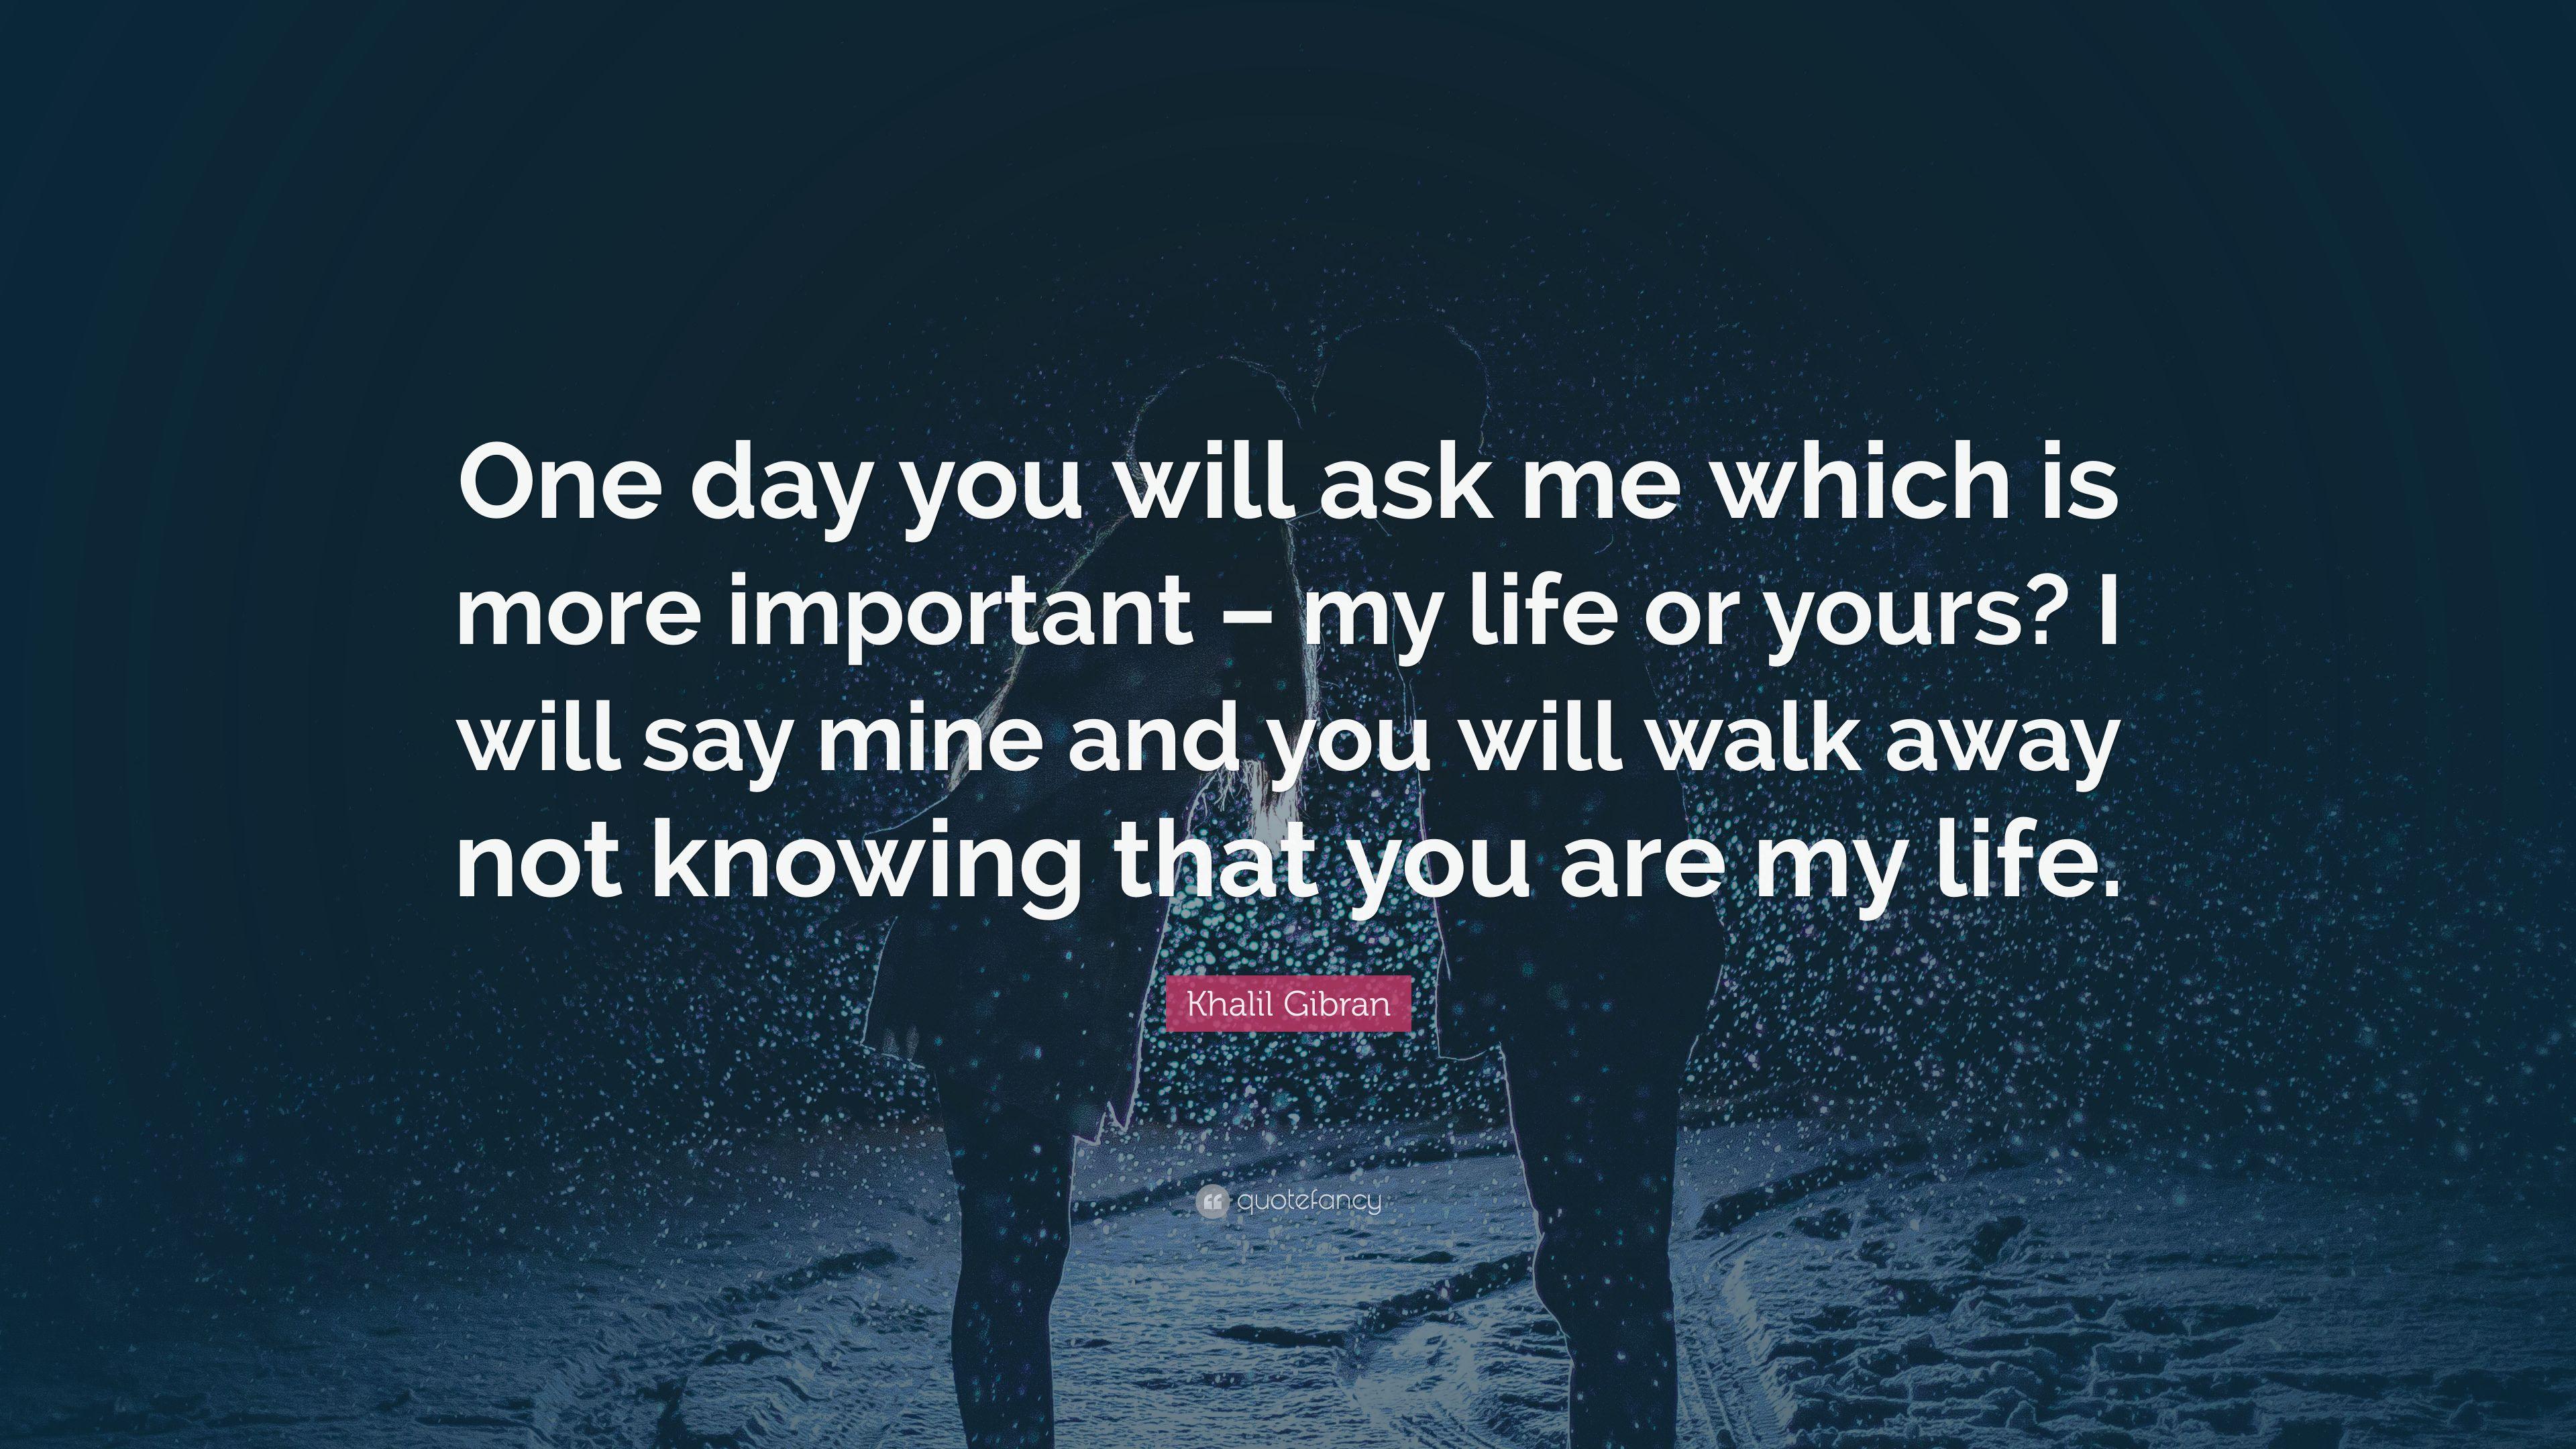 Khalil Gibran Quote: “One day you will ask me which is more